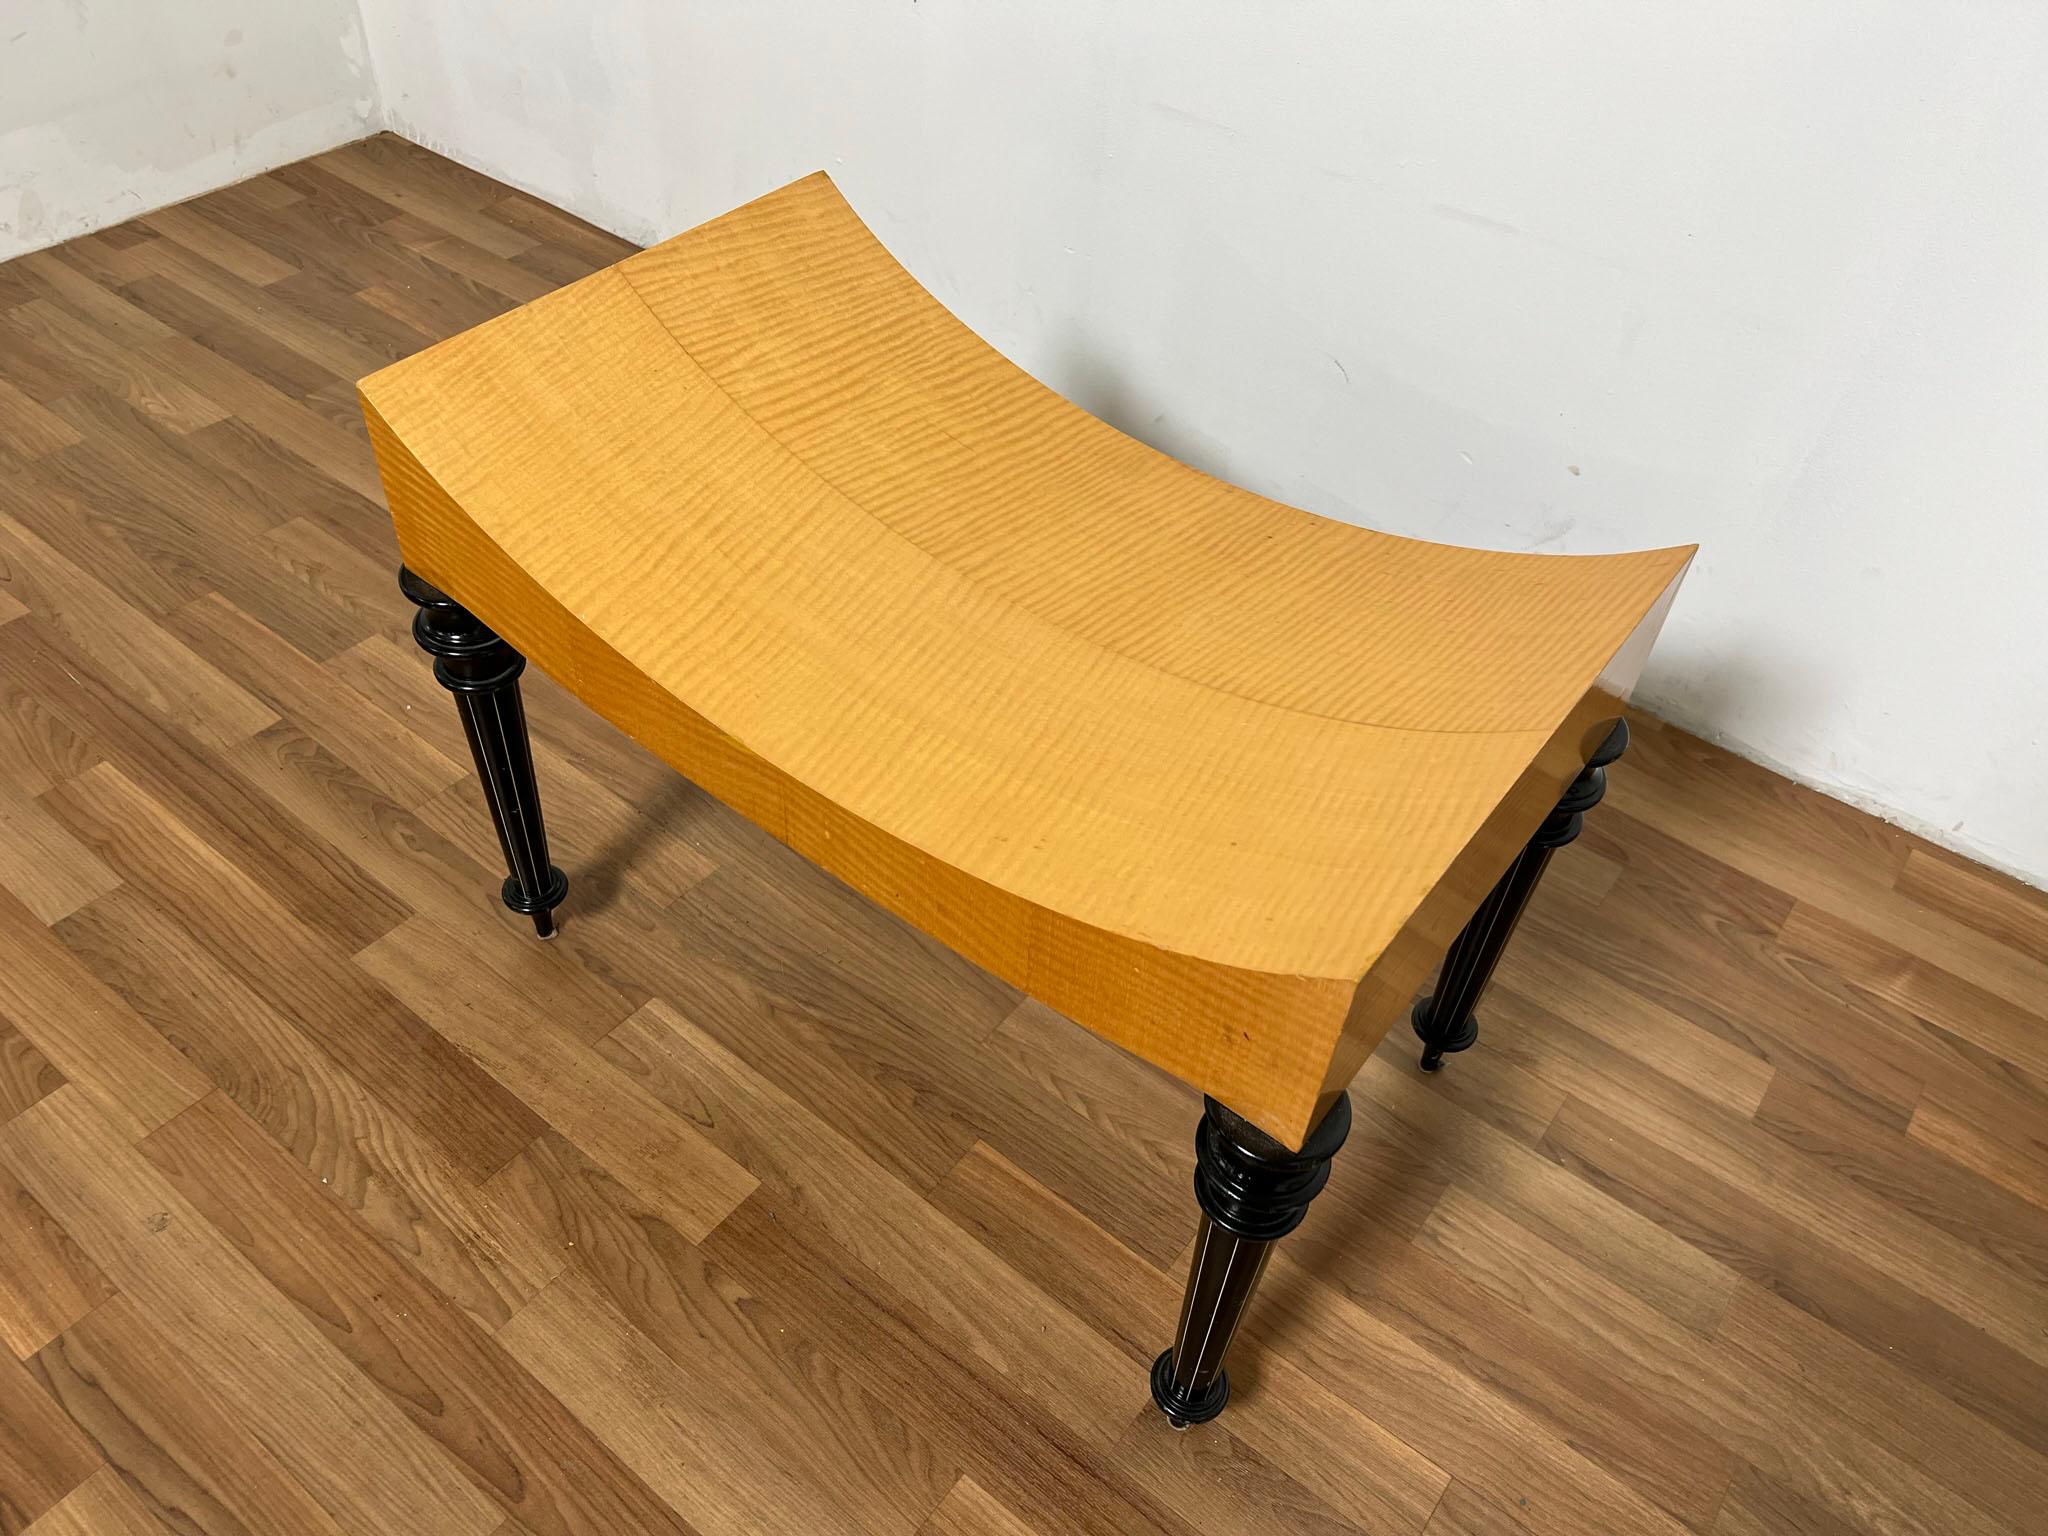 A studio crafted post modern bench with quilted tiger maple seat and contrasting black lacquered turned legs delivers a contemporary interpretation of the Biedermeier style.